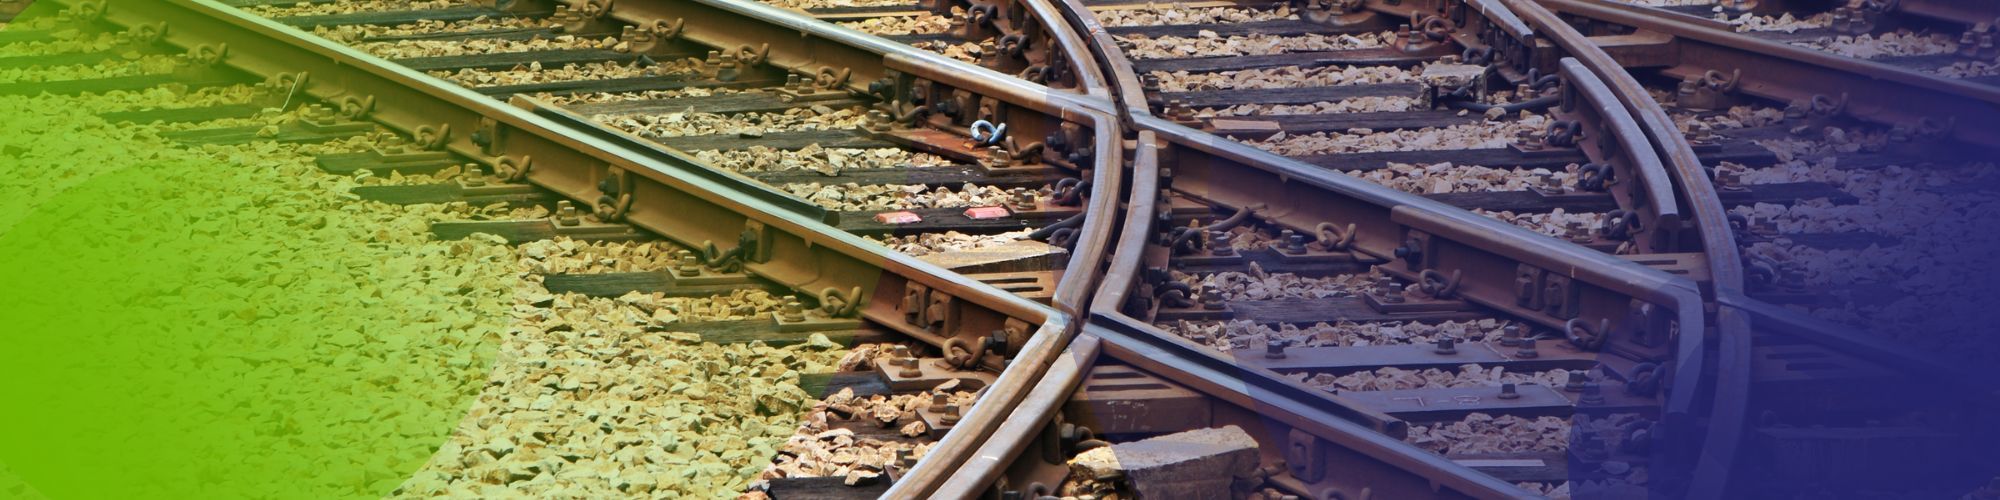 £45bn rail improvement plan puts climate change firmly in its sights.